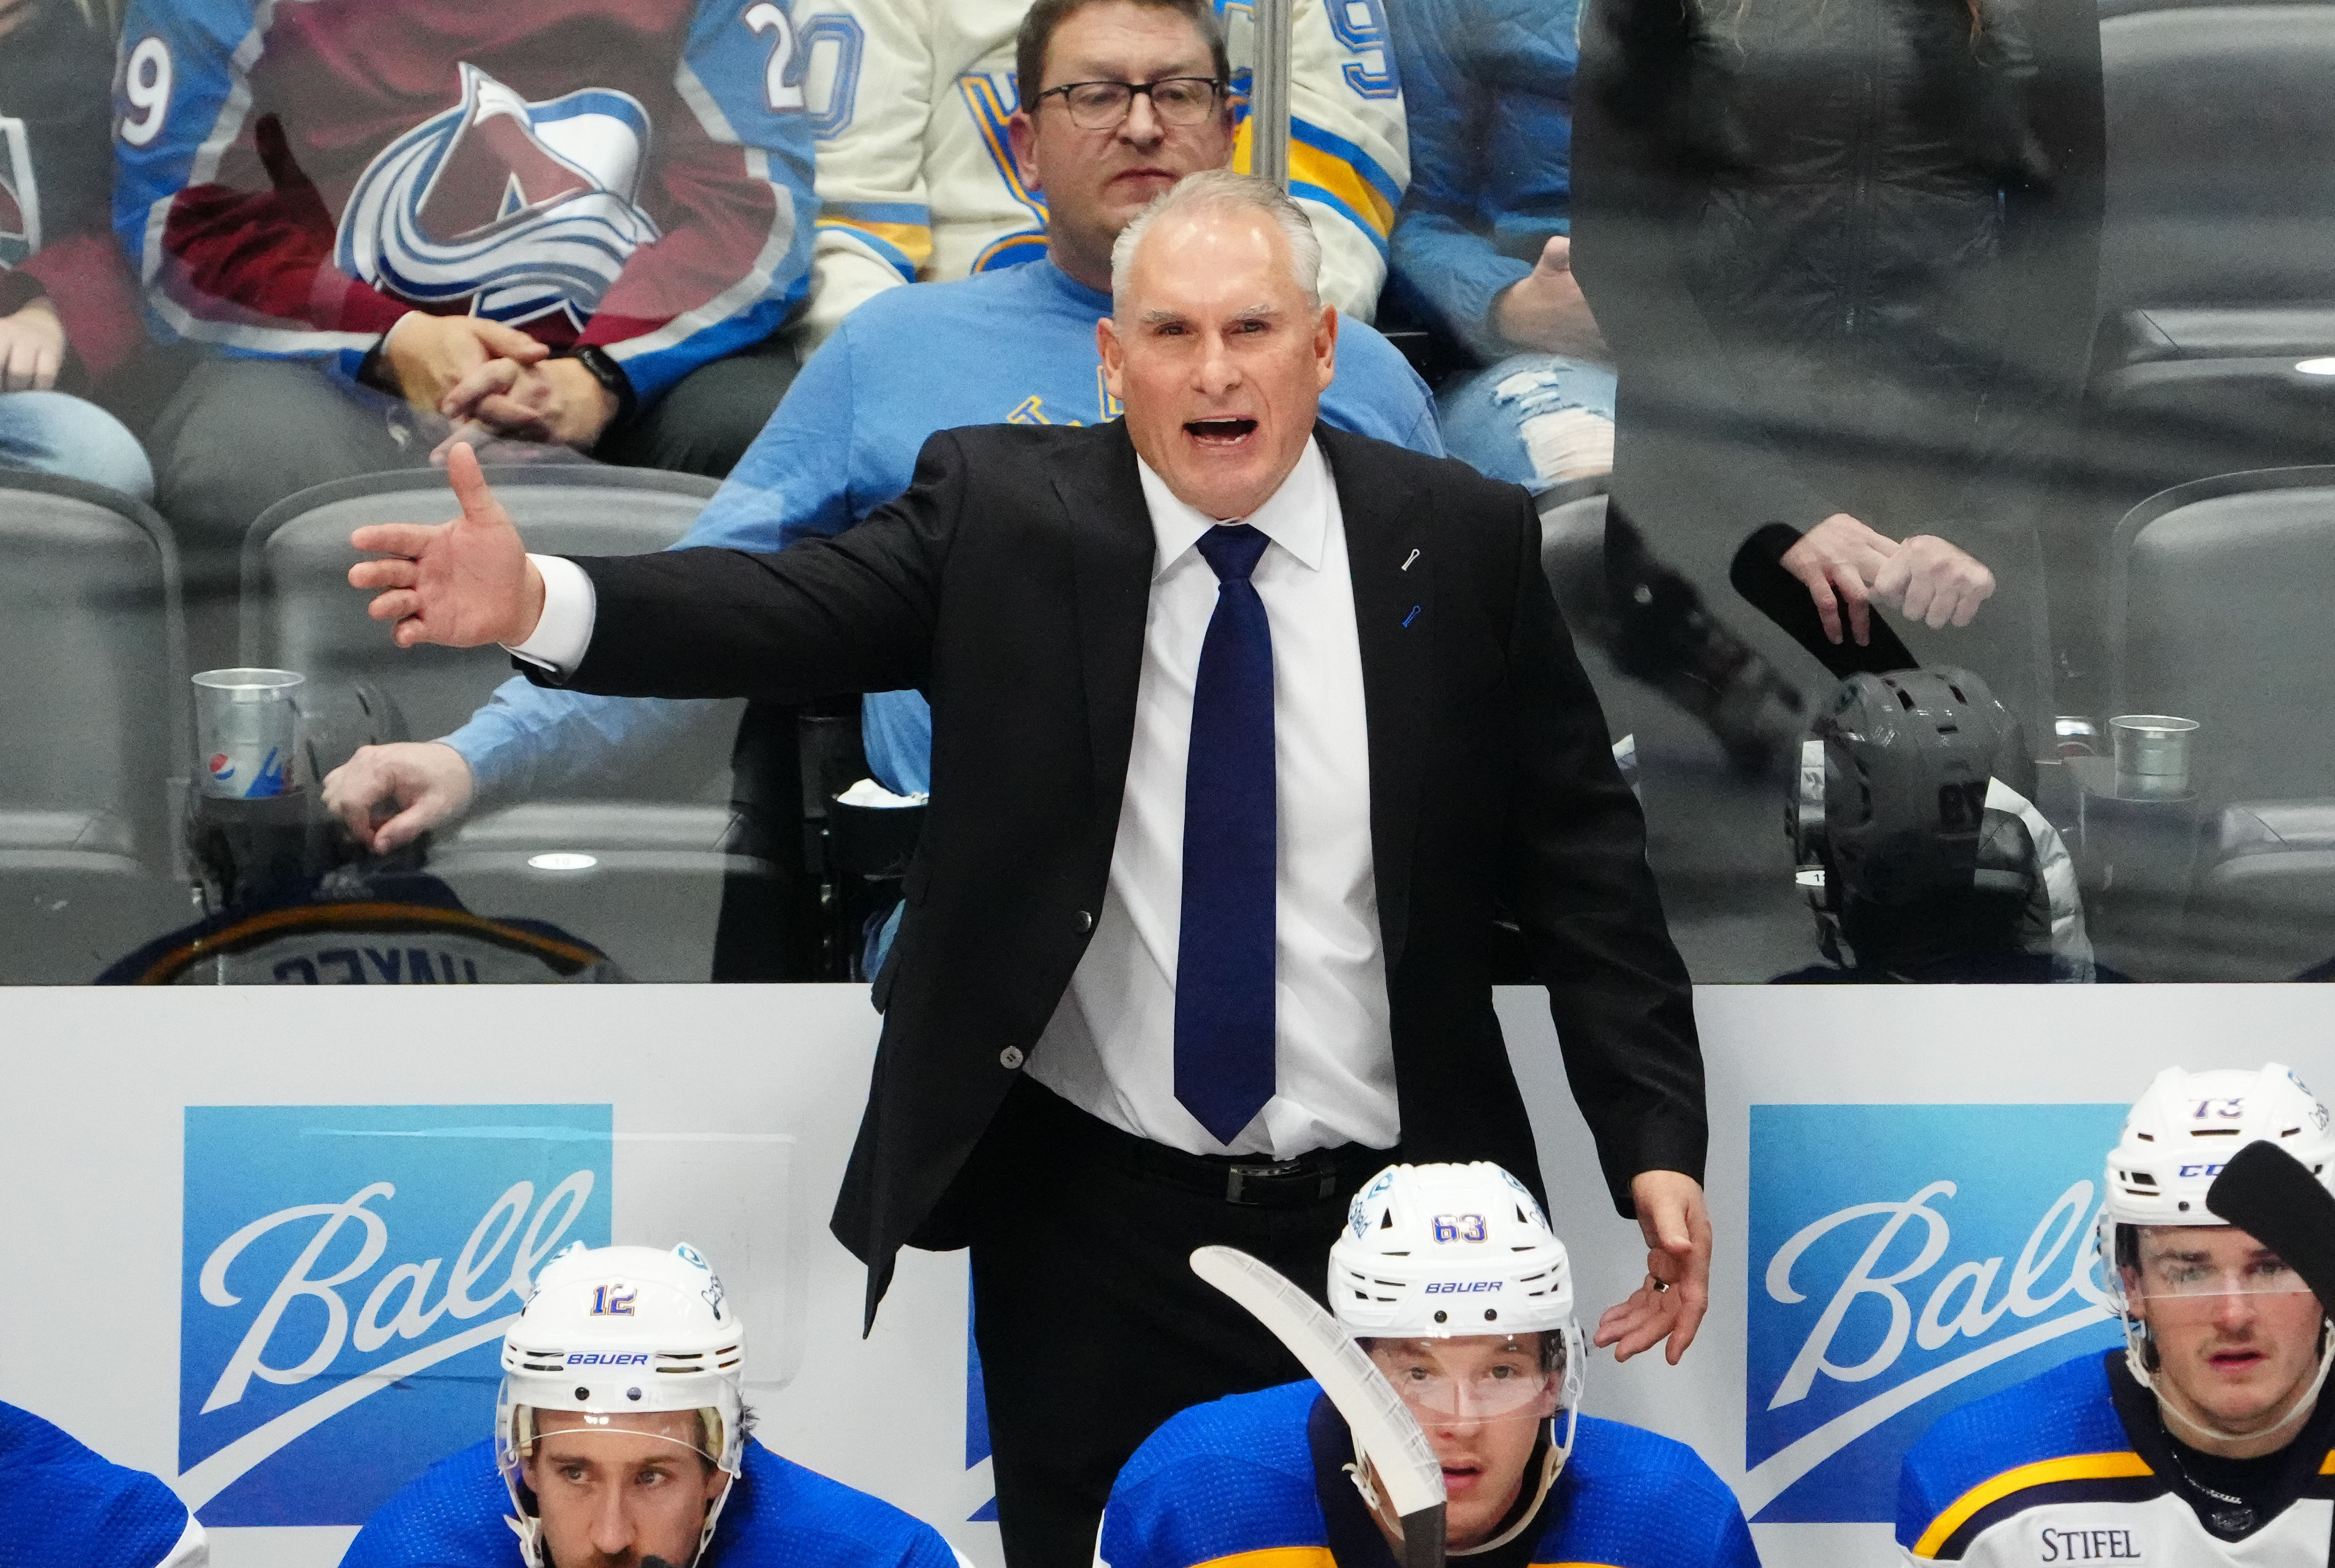 NHL: St. Louis Blues at Colorado Avalanche